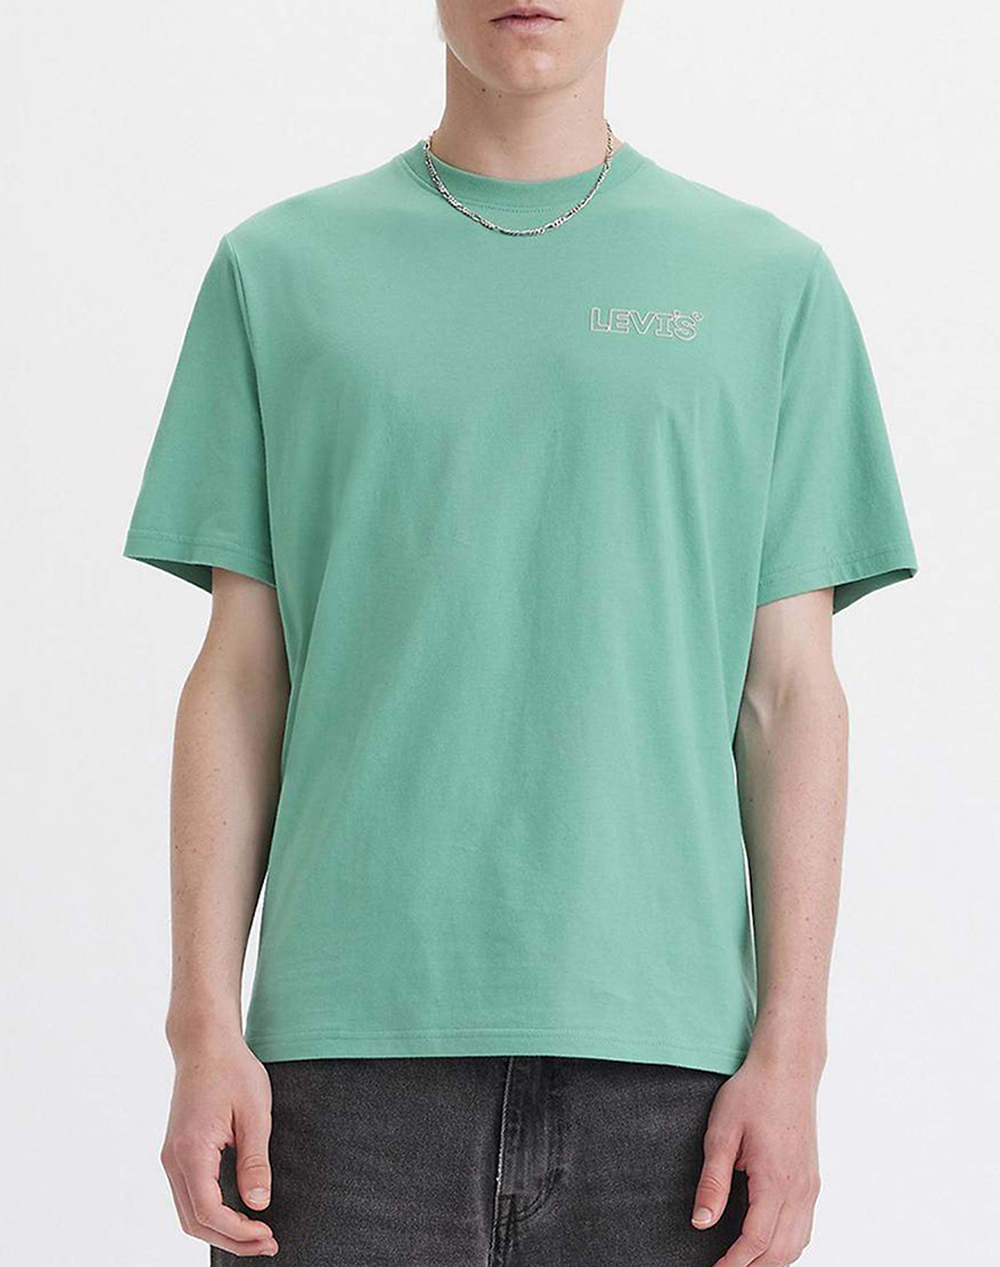 LEVIS RELAXED FIT TEE 16143-1235-1235 MintGreen